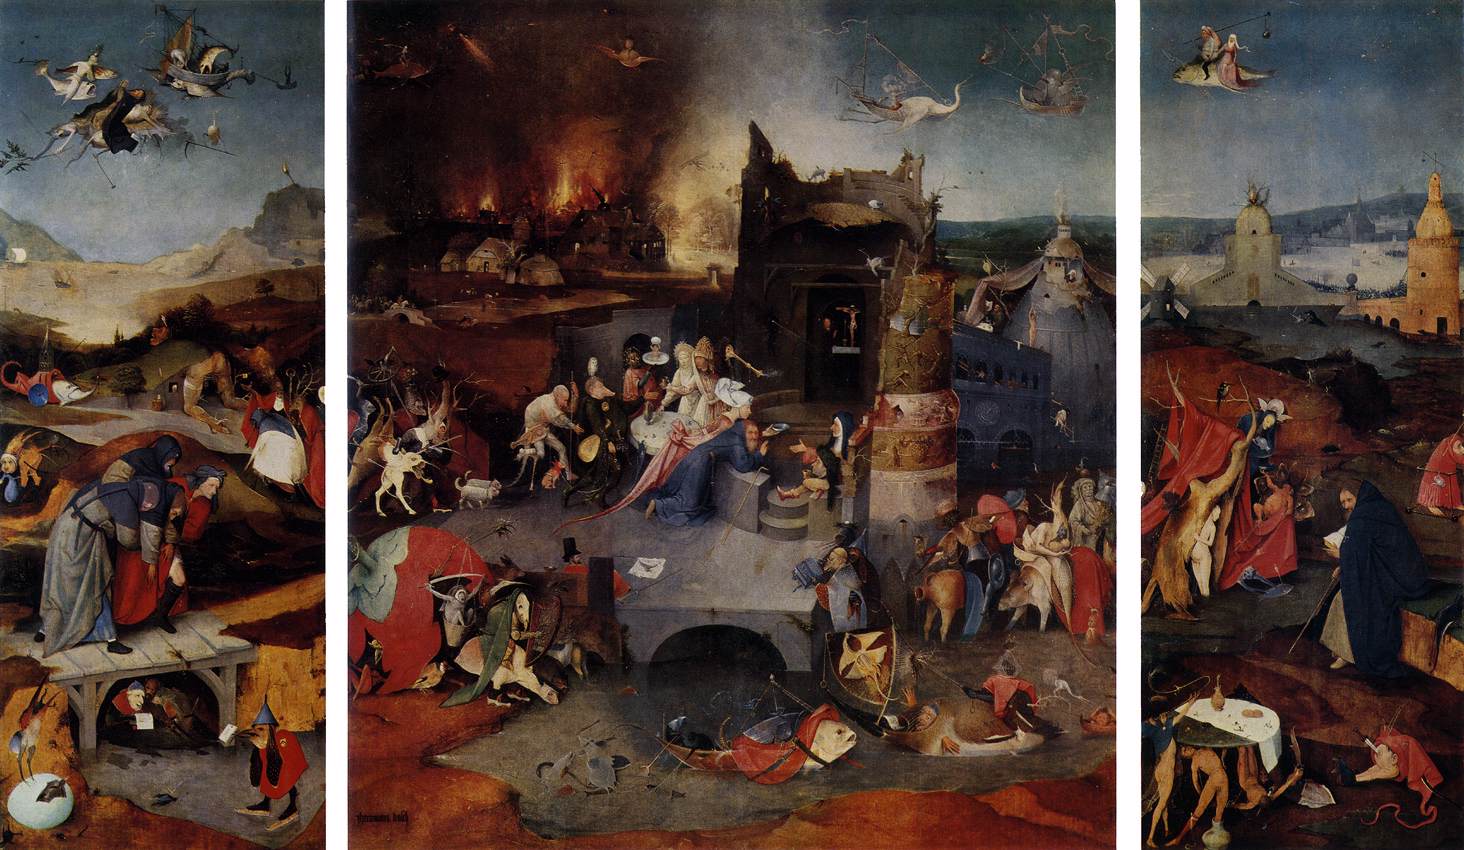 "Triptych Of Temptation Of St. Anthony," by Hieronymus Bosch.